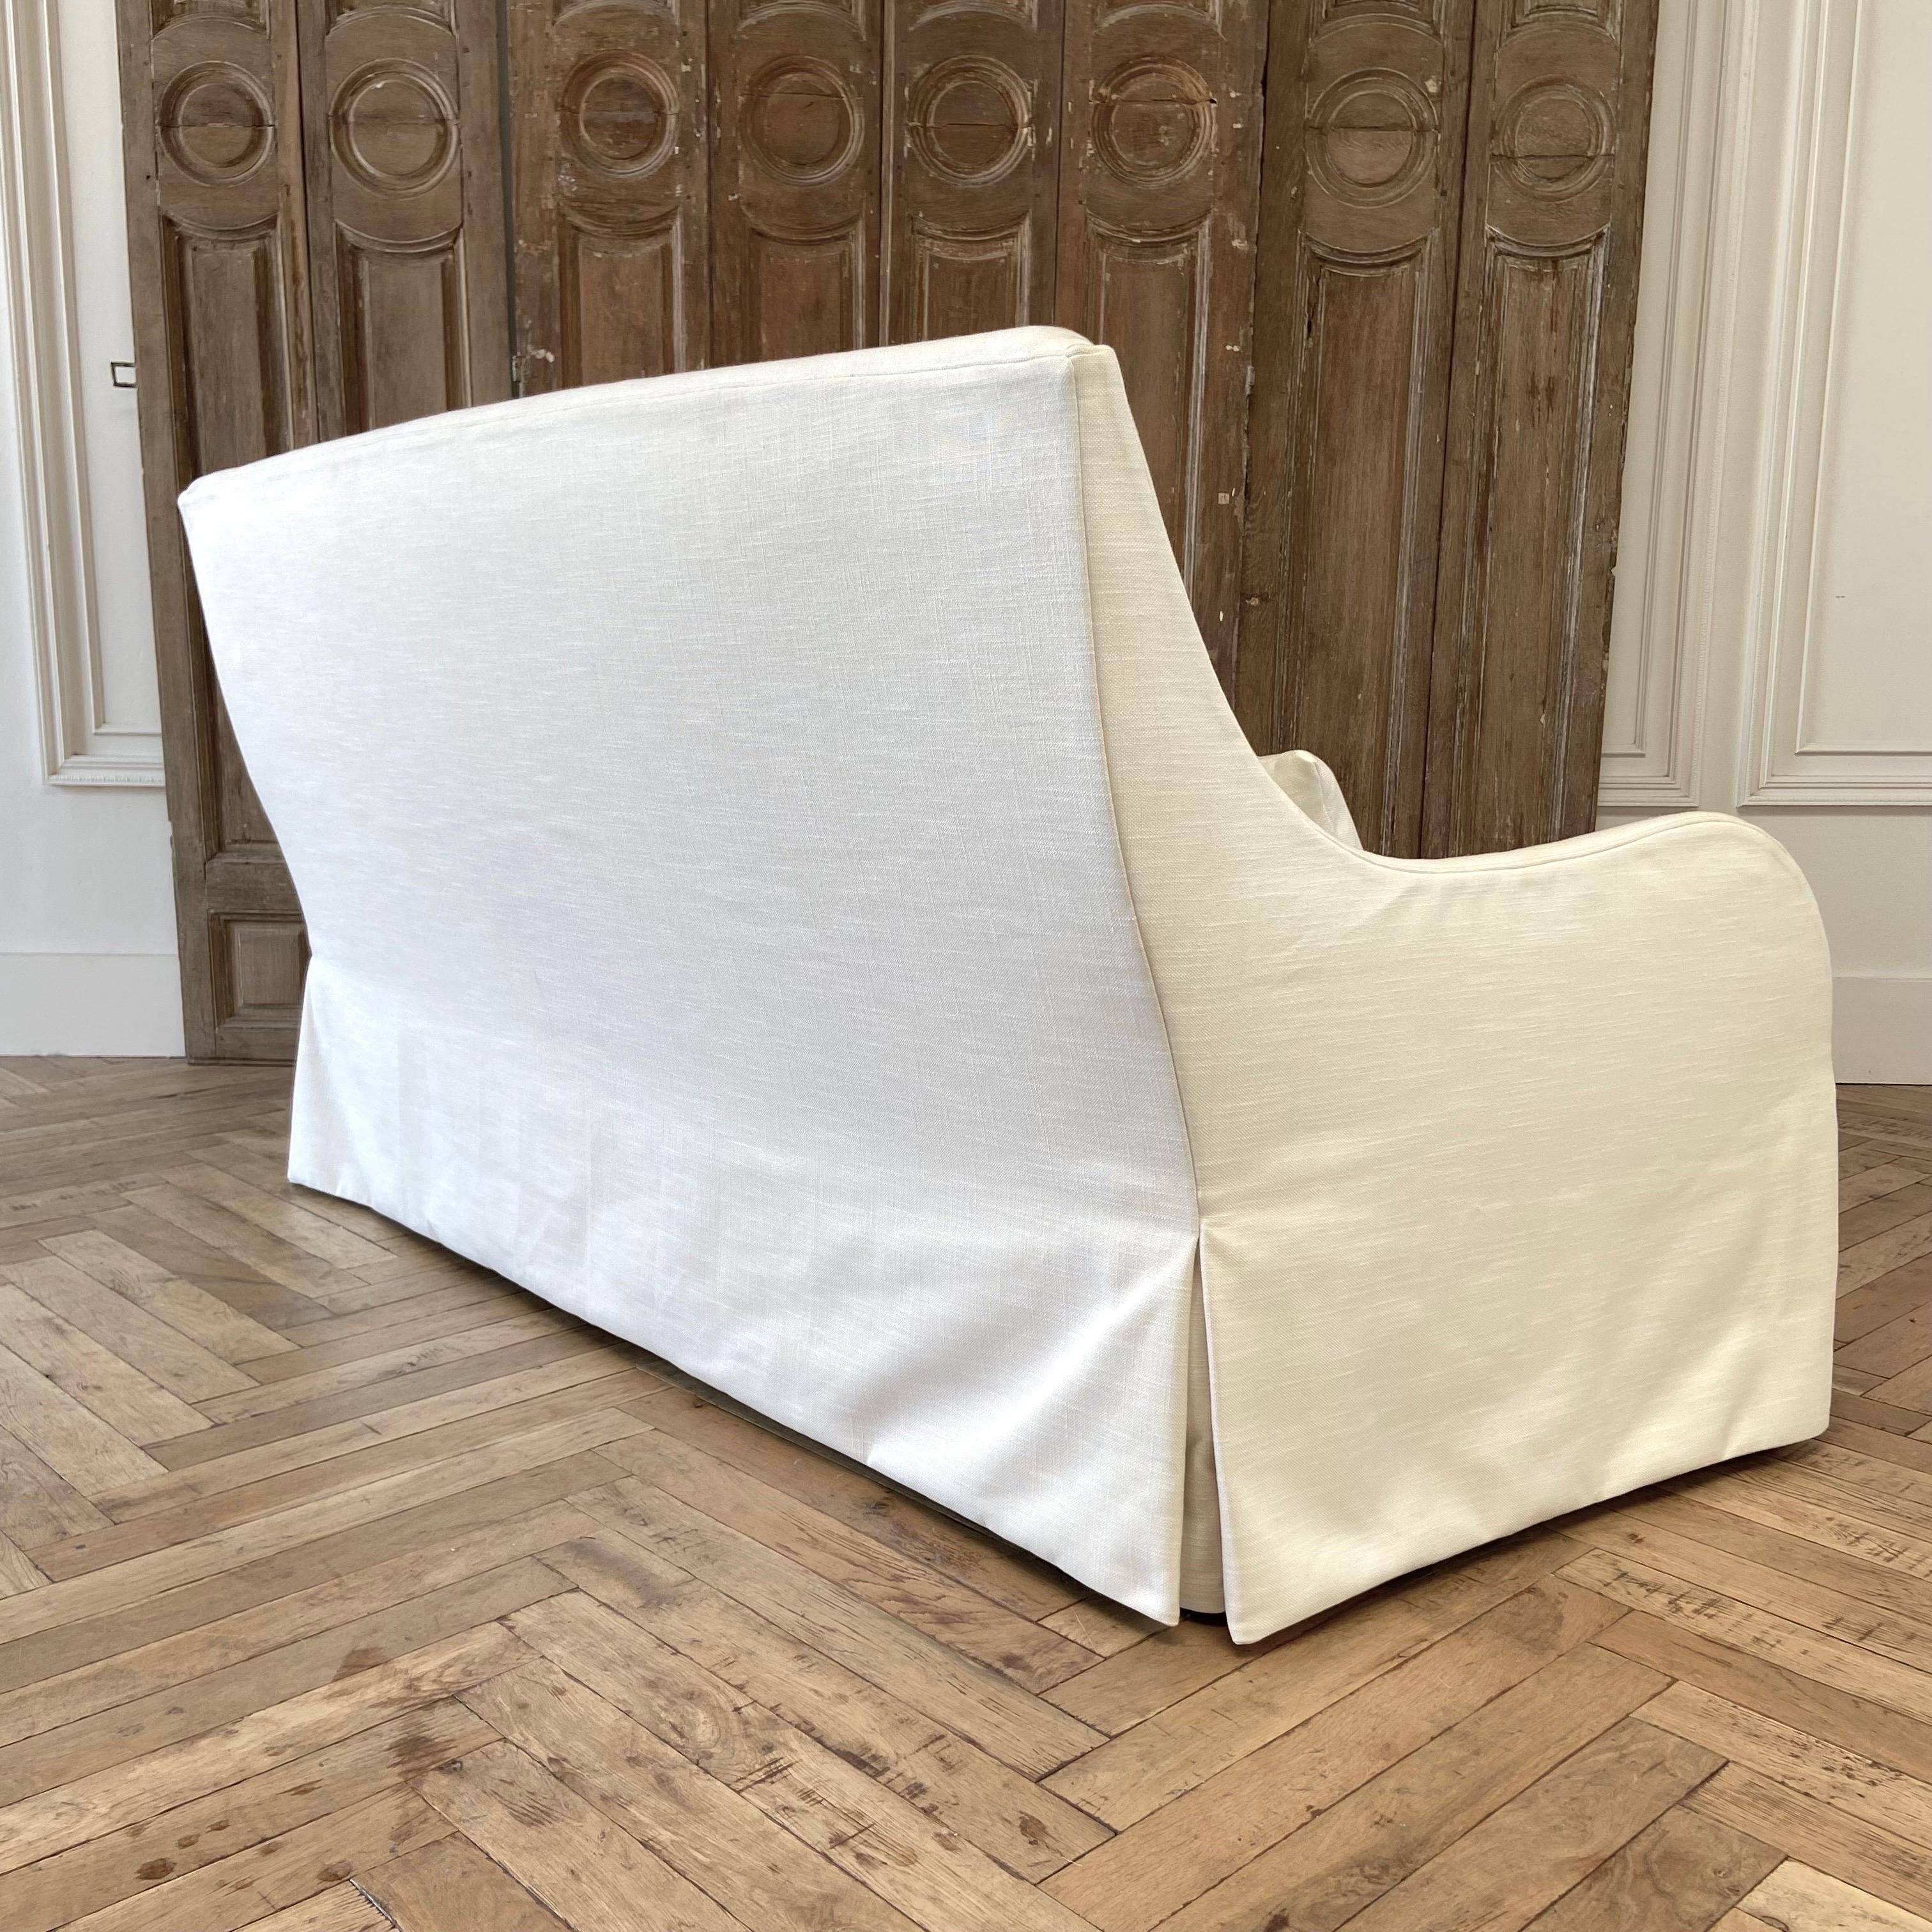 Cotton Custom Sofa Settee in an Off-White Linen Upholstered Fabric